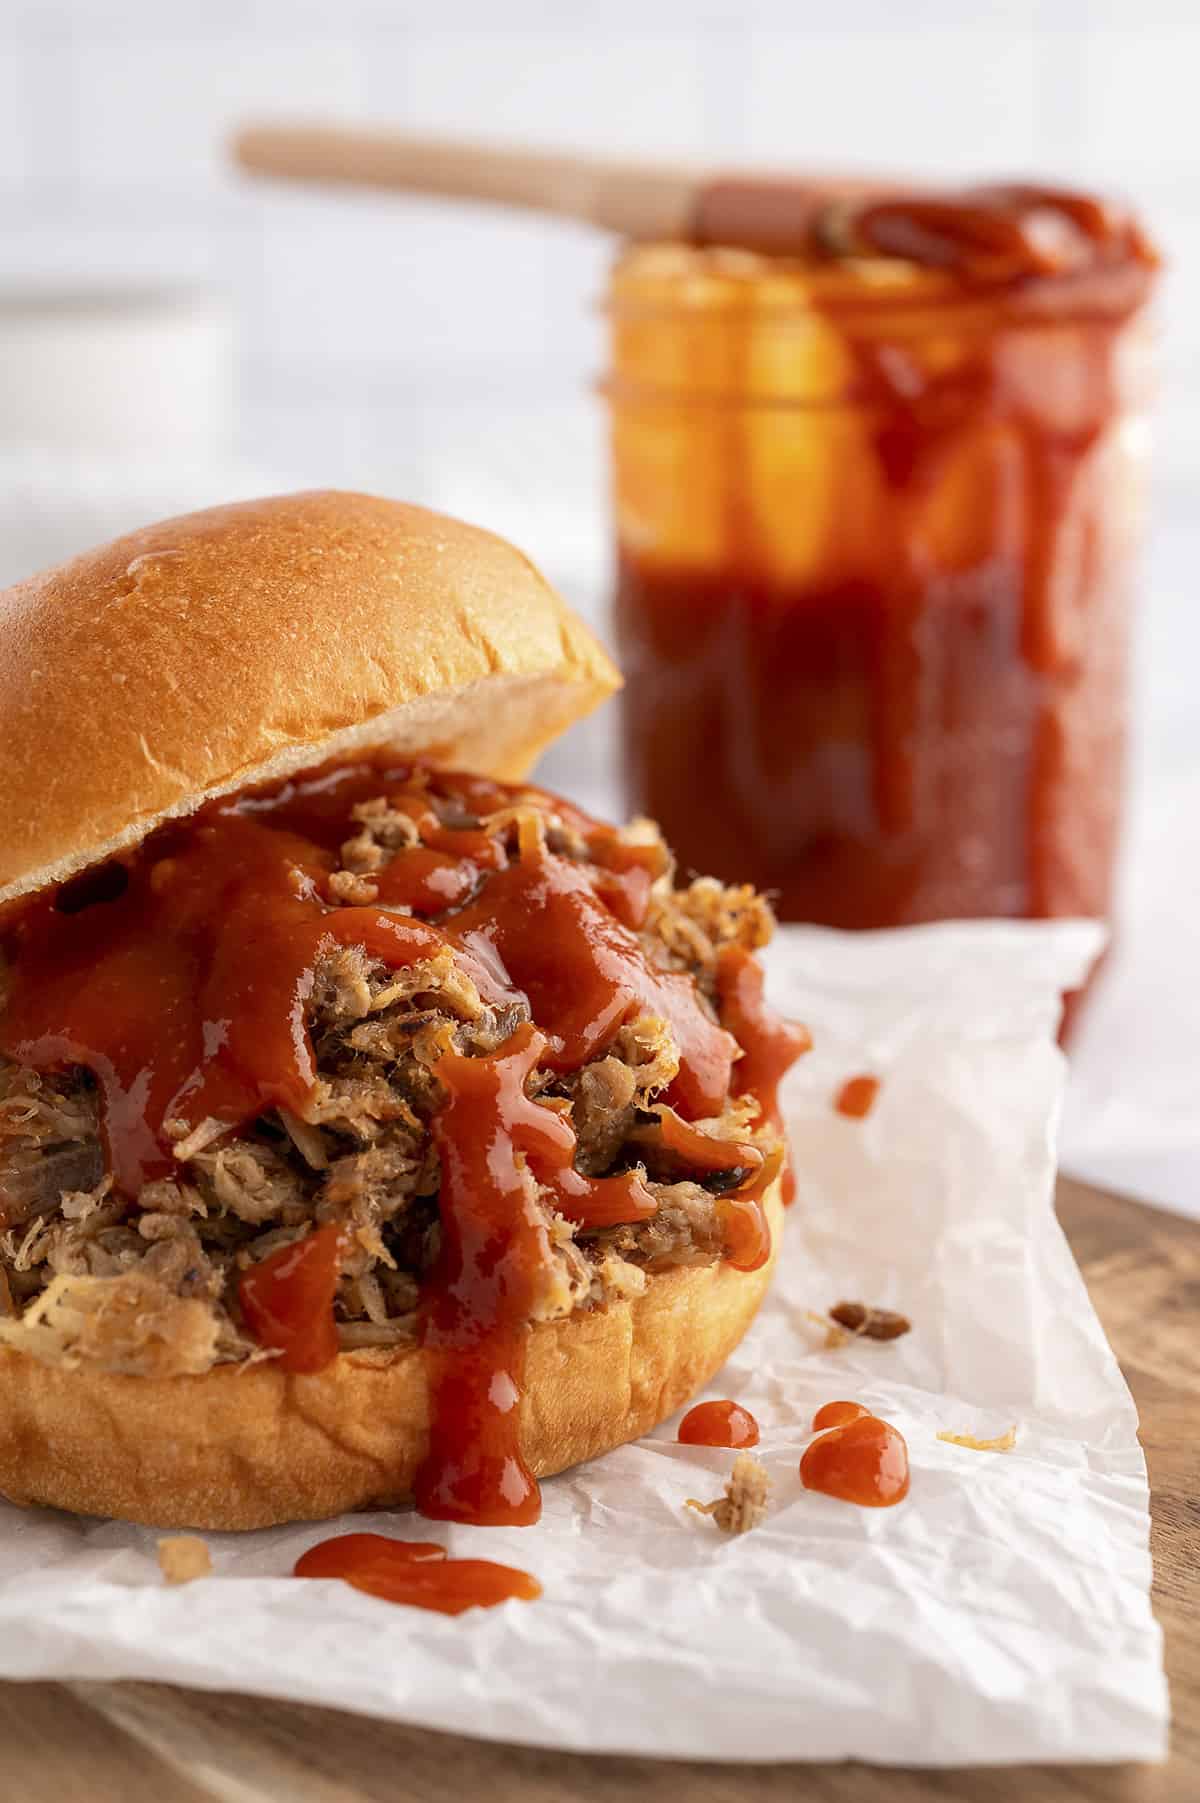 Tangy Carolina BBQ sauce drizzled over pulled pork sandwich.